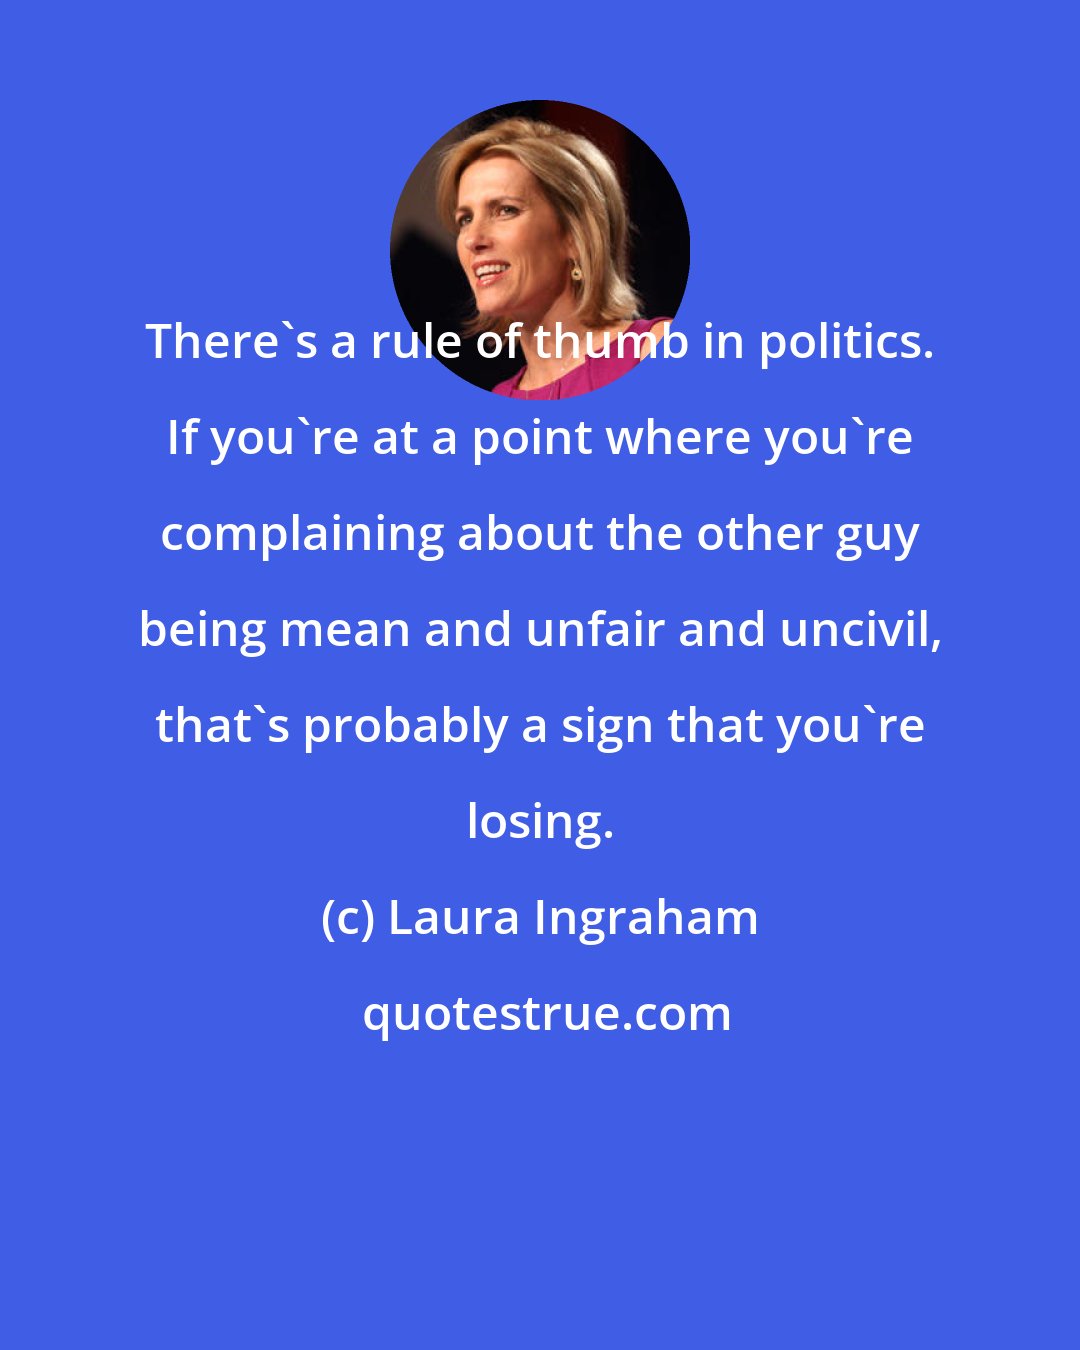 Laura Ingraham: There's a rule of thumb in politics. If you're at a point where you're complaining about the other guy being mean and unfair and uncivil, that's probably a sign that you're losing.